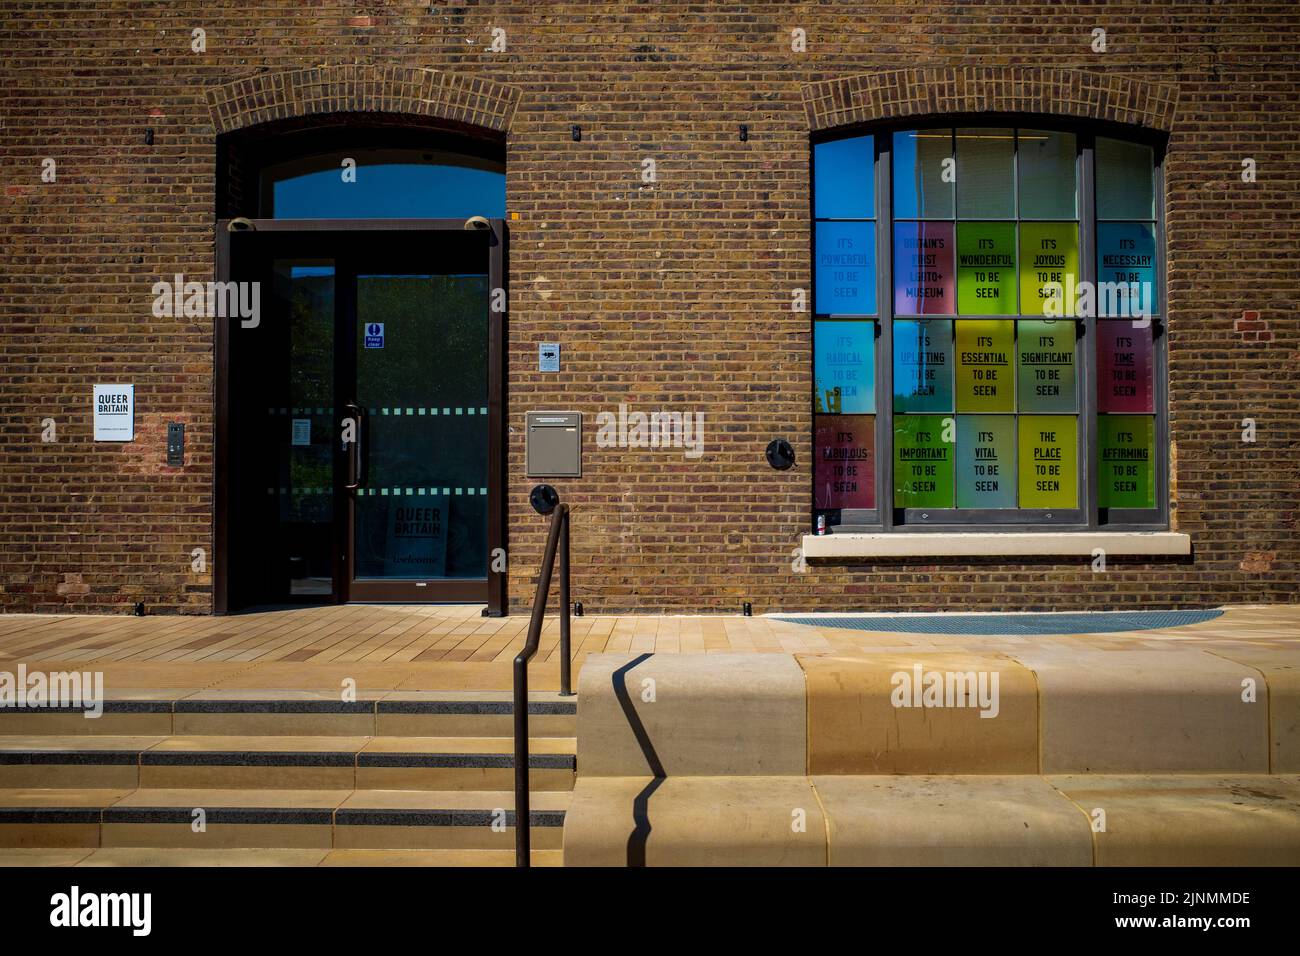 Queer Britain Museum London. Queer Britain is a museum of British LGBTQ history and culture at 2 Granary Square Kings Cross Central London. Open 2022. Stock Photo